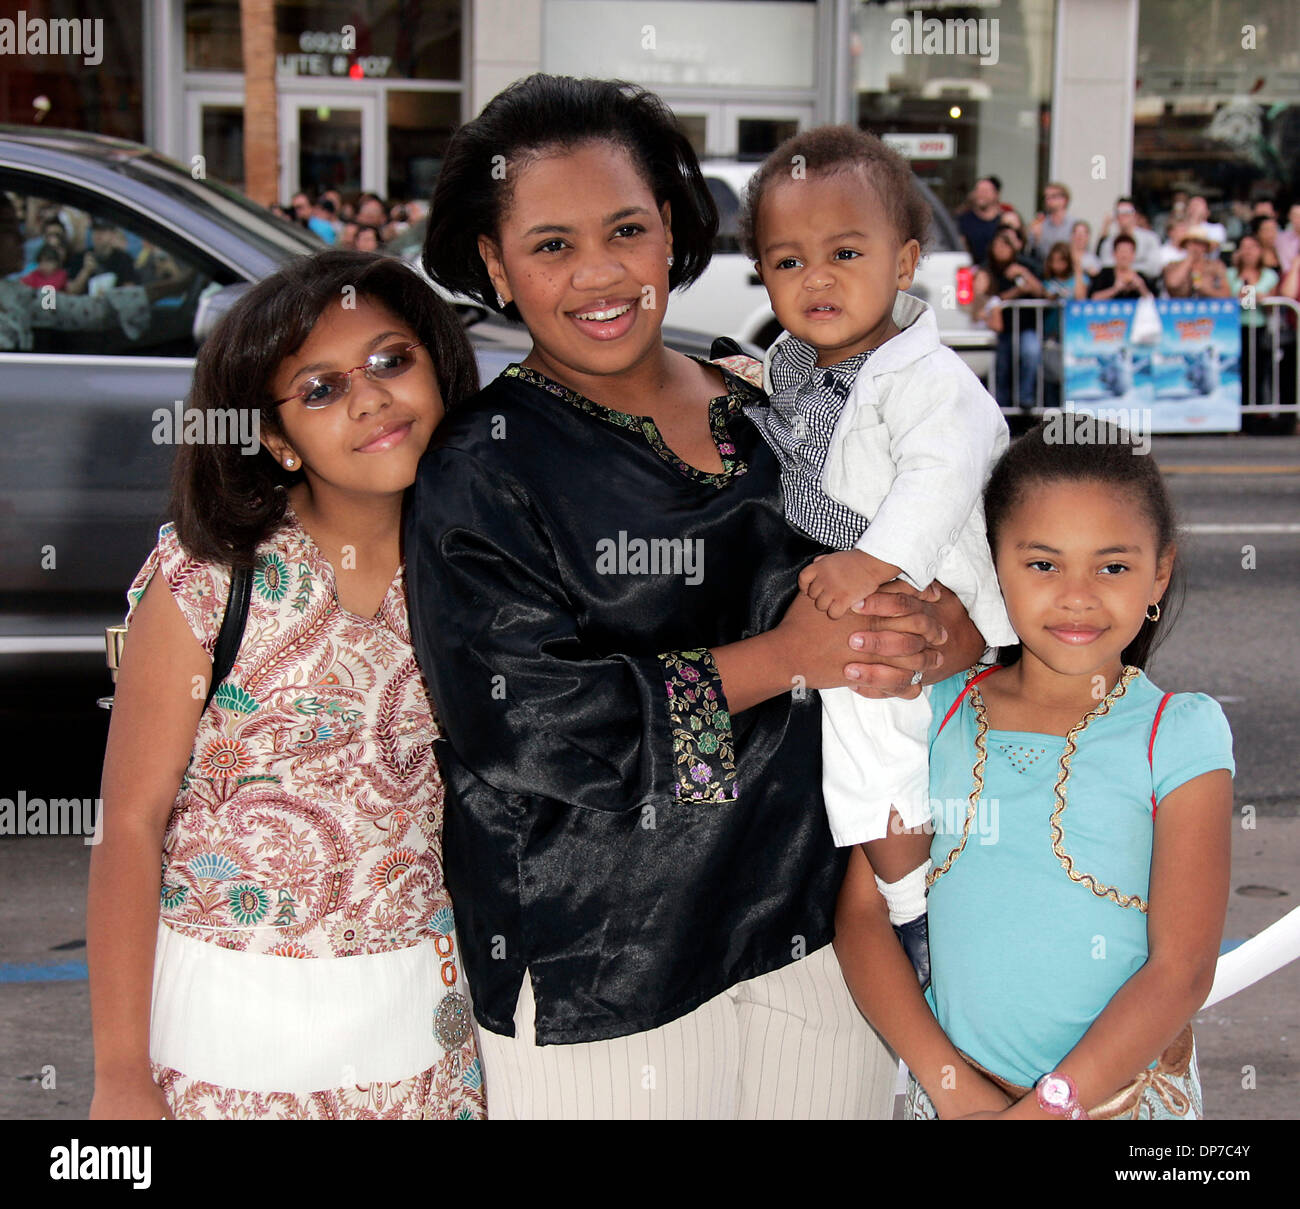 Nov 12, 2006; Hollywood, California, USA; Actress CHANDRA WILSON & KIDS at the 'Happy Feet' World Premiere held at Mann Chinese Theater. Mandatory Credit: Photo by Lisa O'Connor/ZUMA Press. (©) Copyright 2006 by Lisa O'Connor Stock Photo